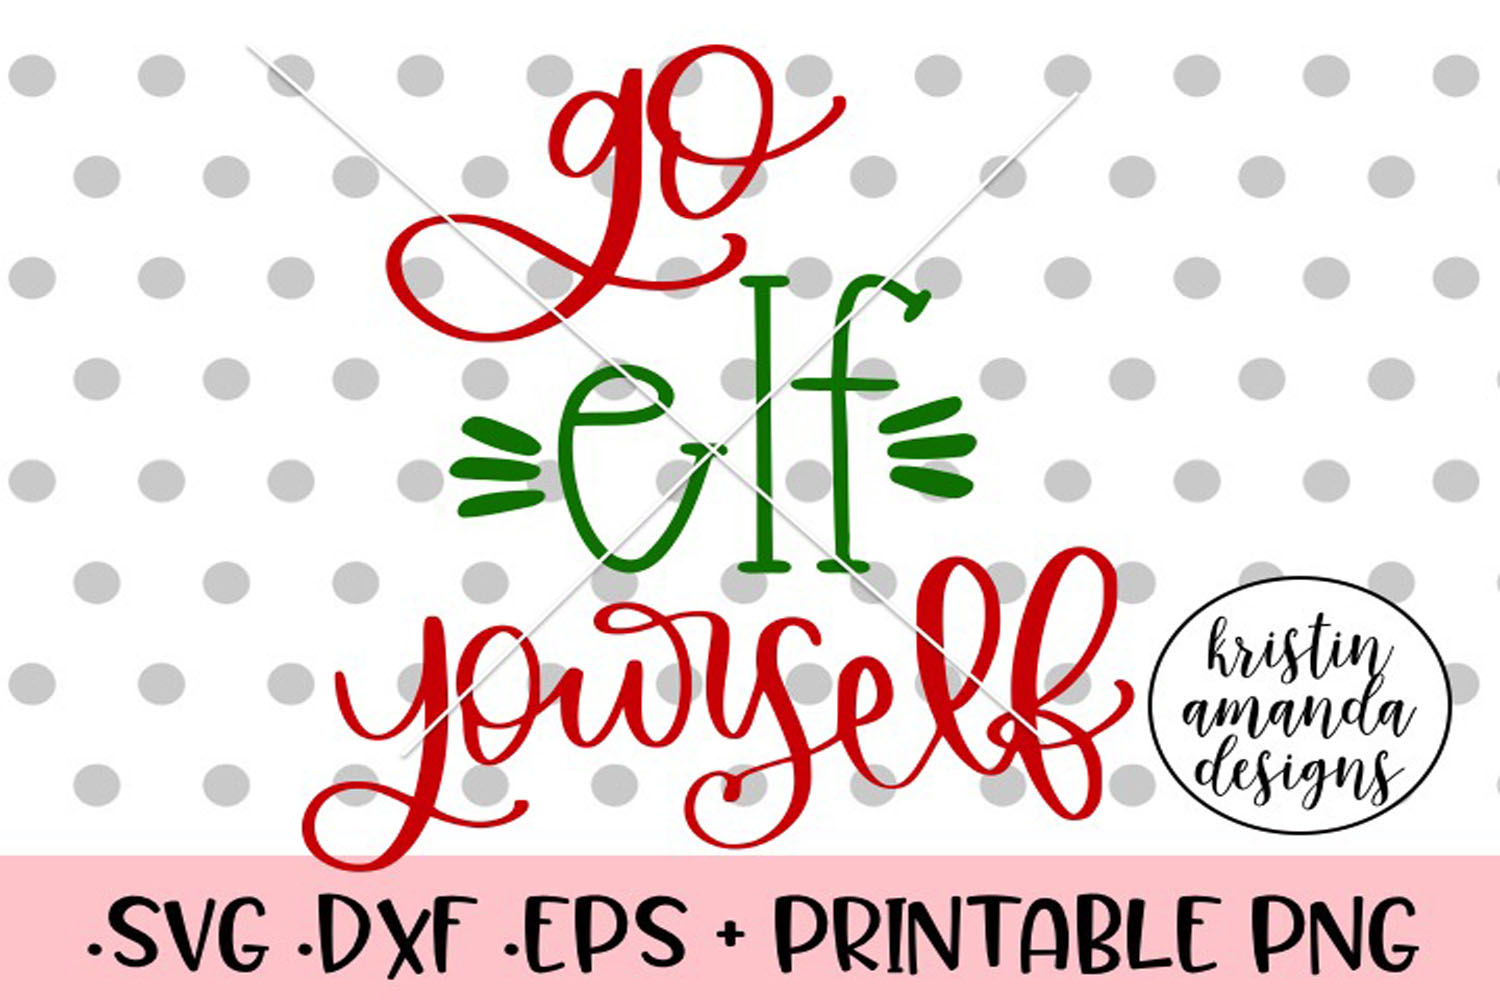 Go Elf Yourself Christmas SVG DXF PNG EPS Cut File Silhouett